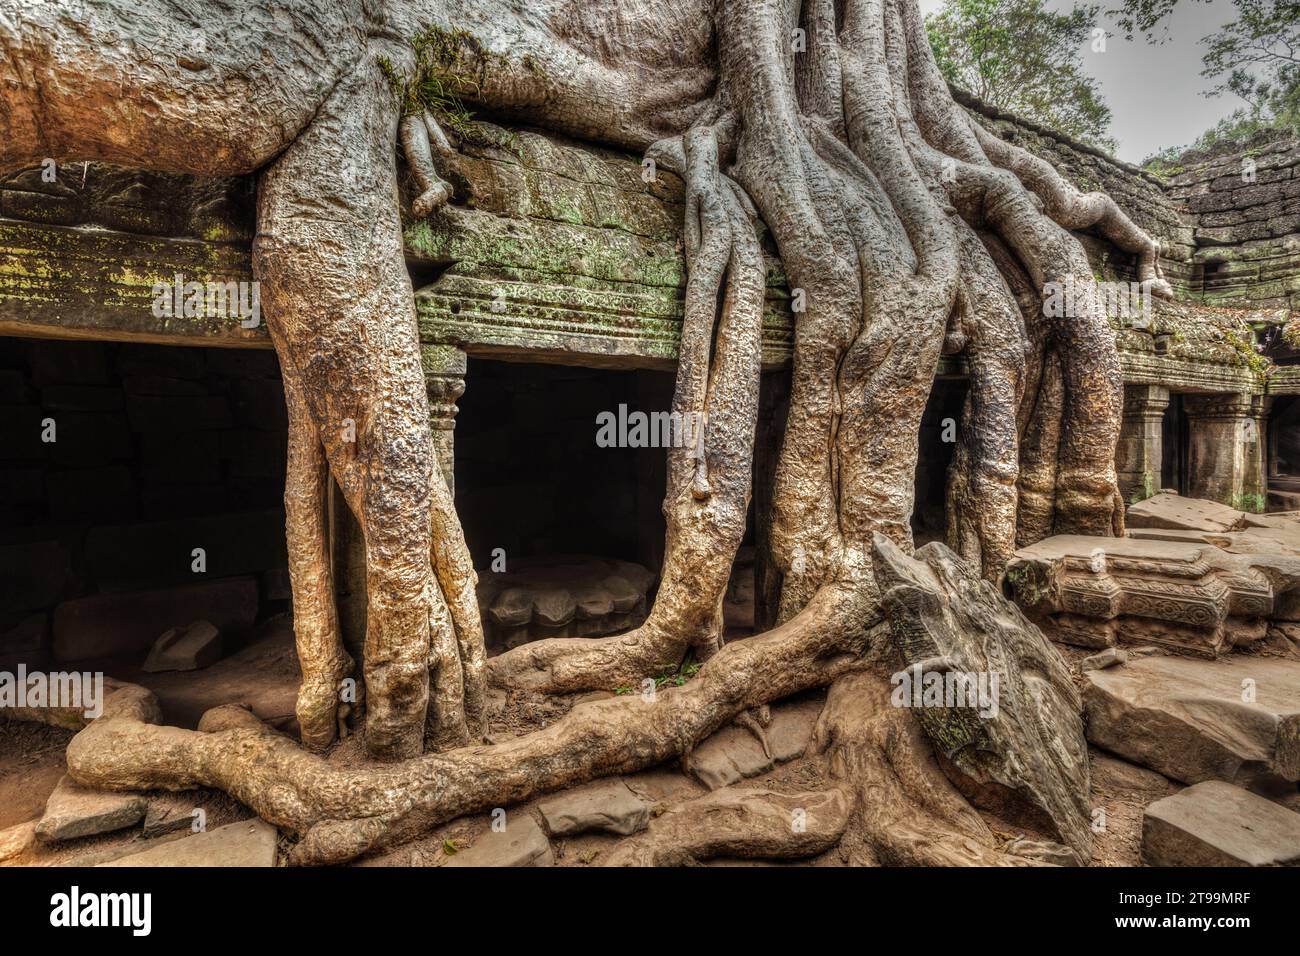 Ancient ruins and tree roots, Ta Prohm temple, Angkor, Cambodia Stock Photo